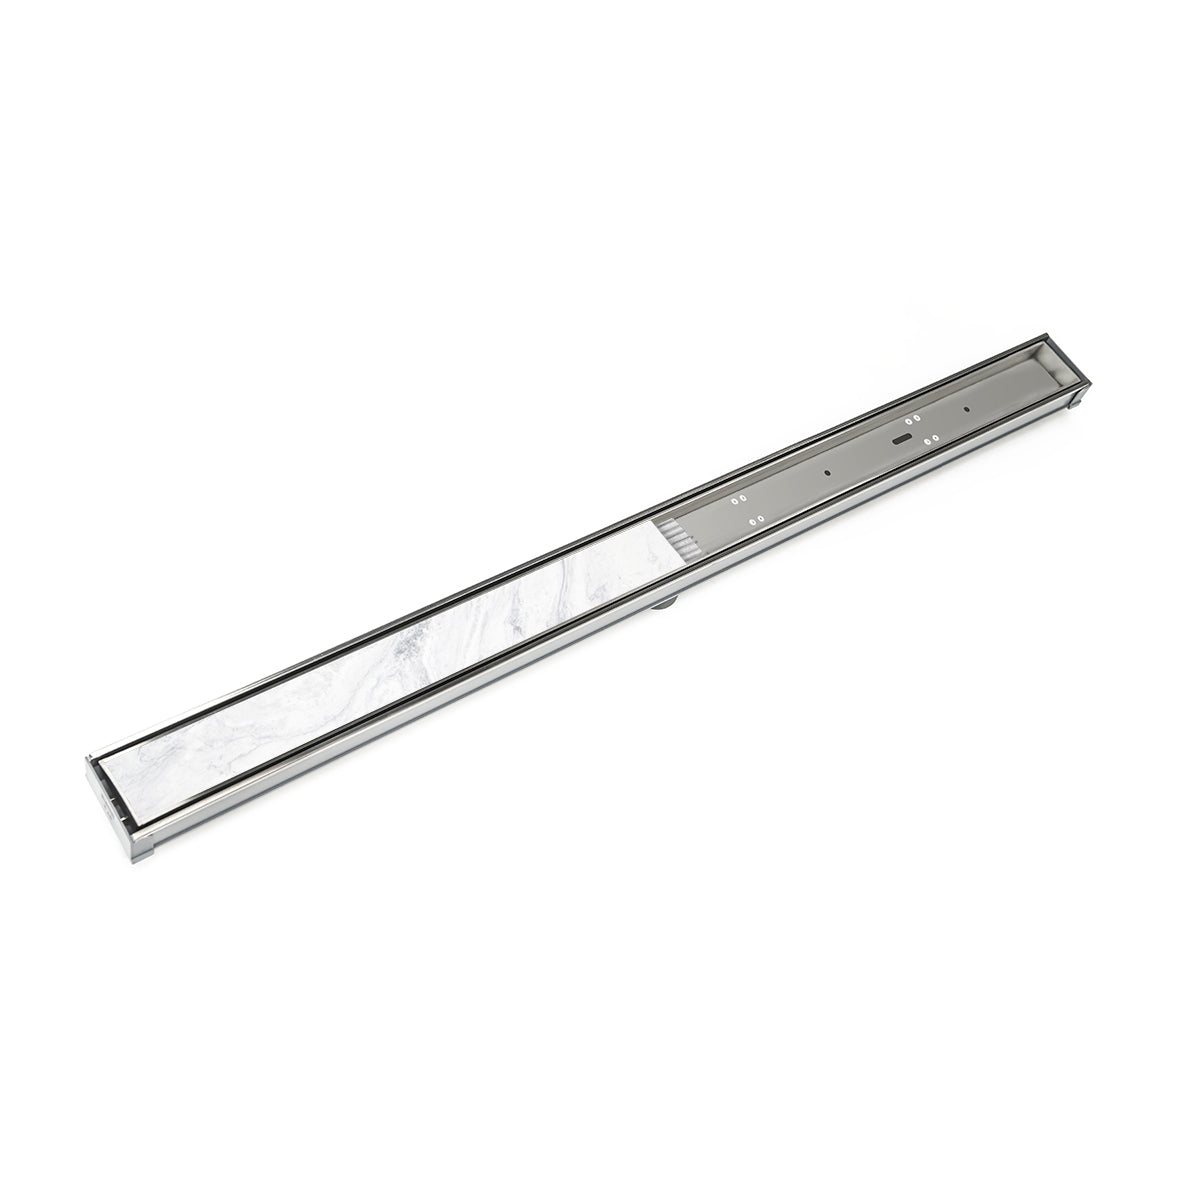 Infinity Drain 48" S-PVC Series Low Profile Site Sizable Linear Drain Kit with 2 1/2" Tile Insert Frame